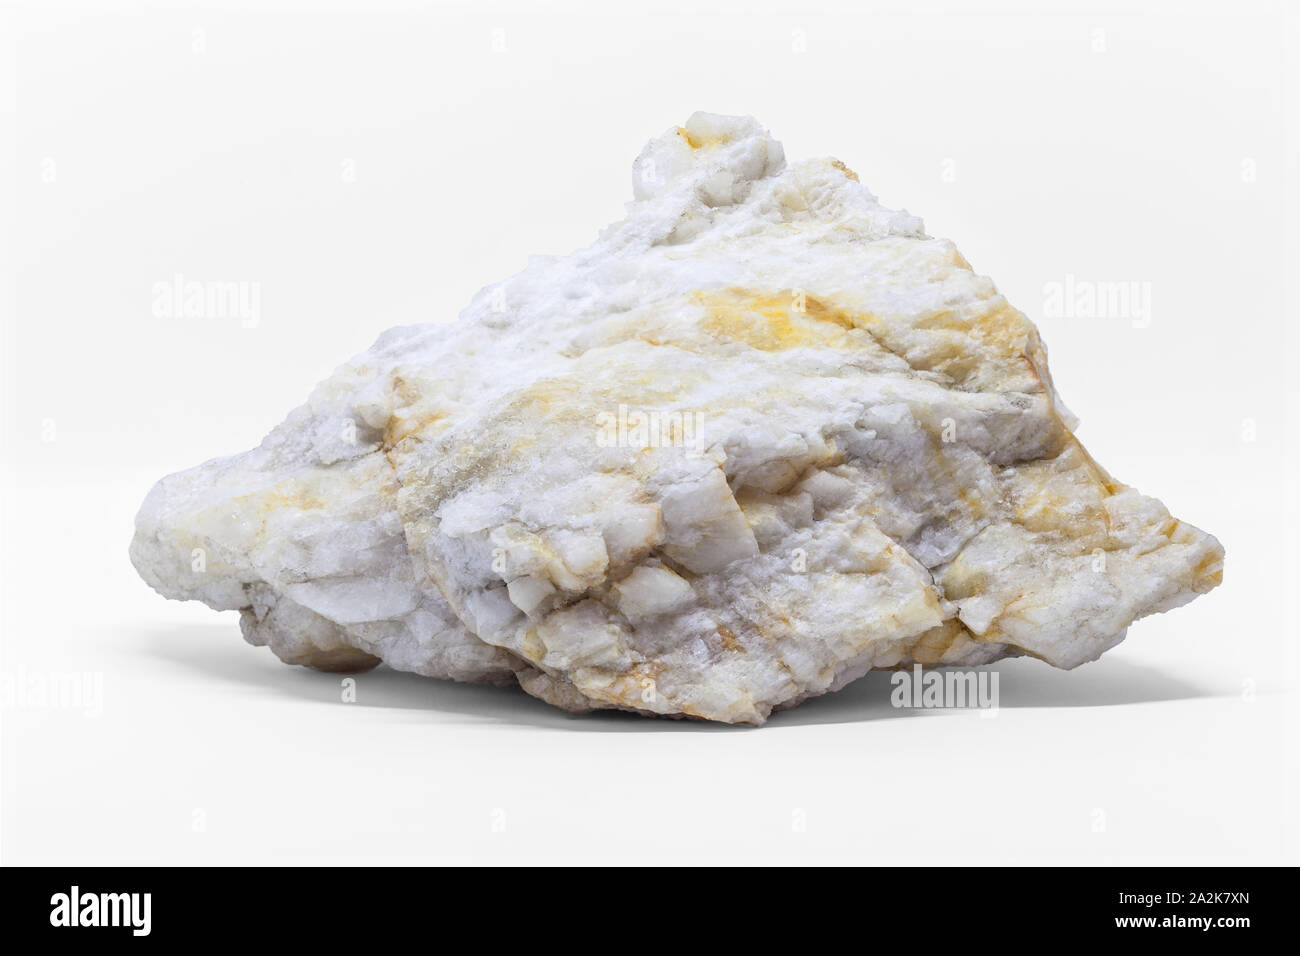 White Rock Marble isolated on white background. Piece of natural mineral close up Stock Photo